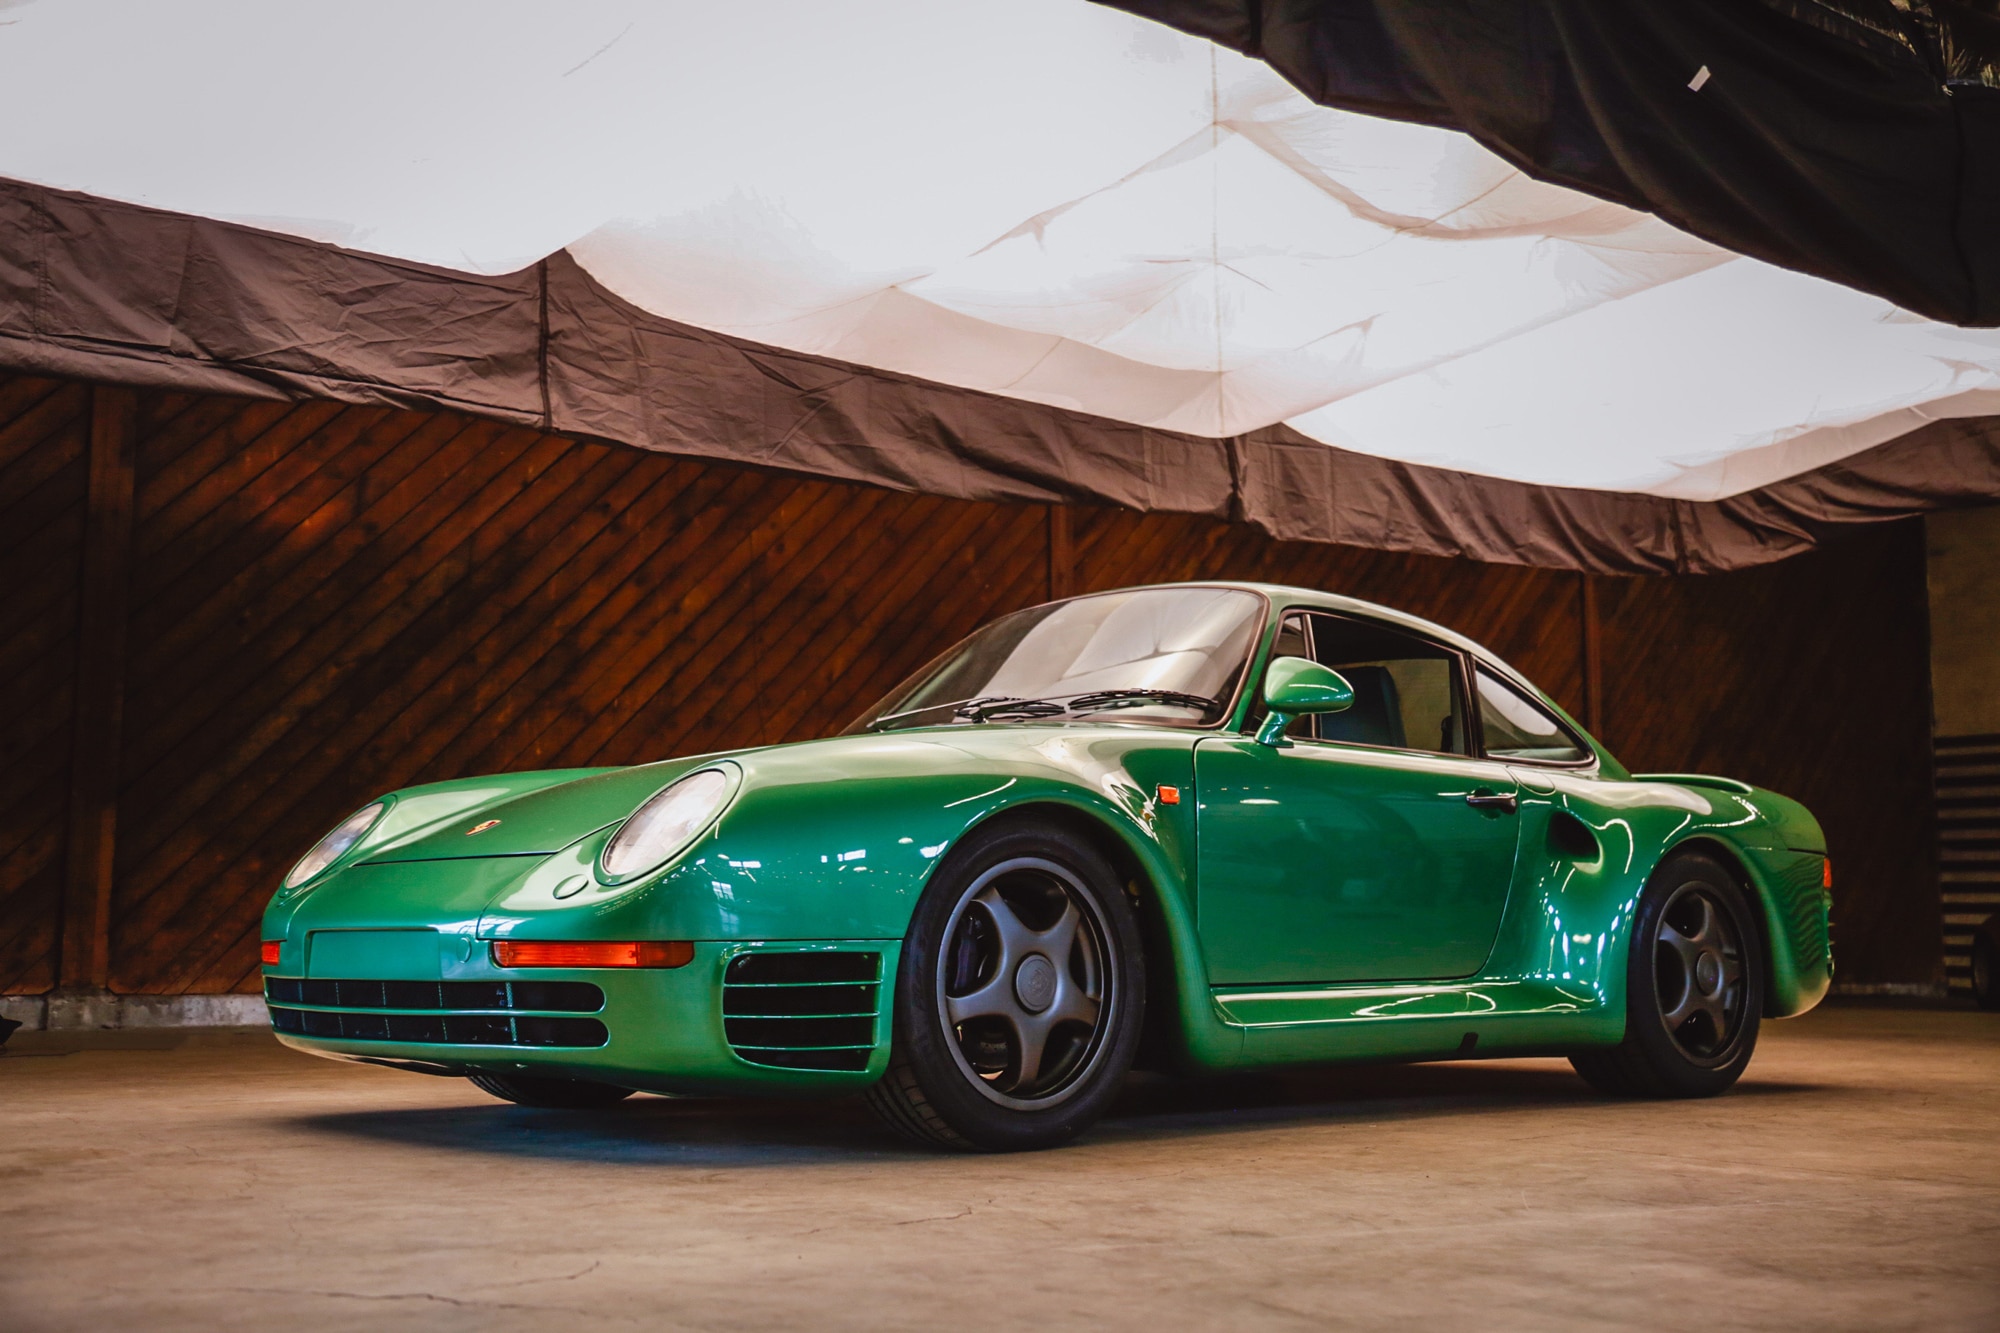 Front three-quarter shot of a green Canepa-modified Porsche 959 at Luftgekundefinedhlt in Los Angeles in 2017